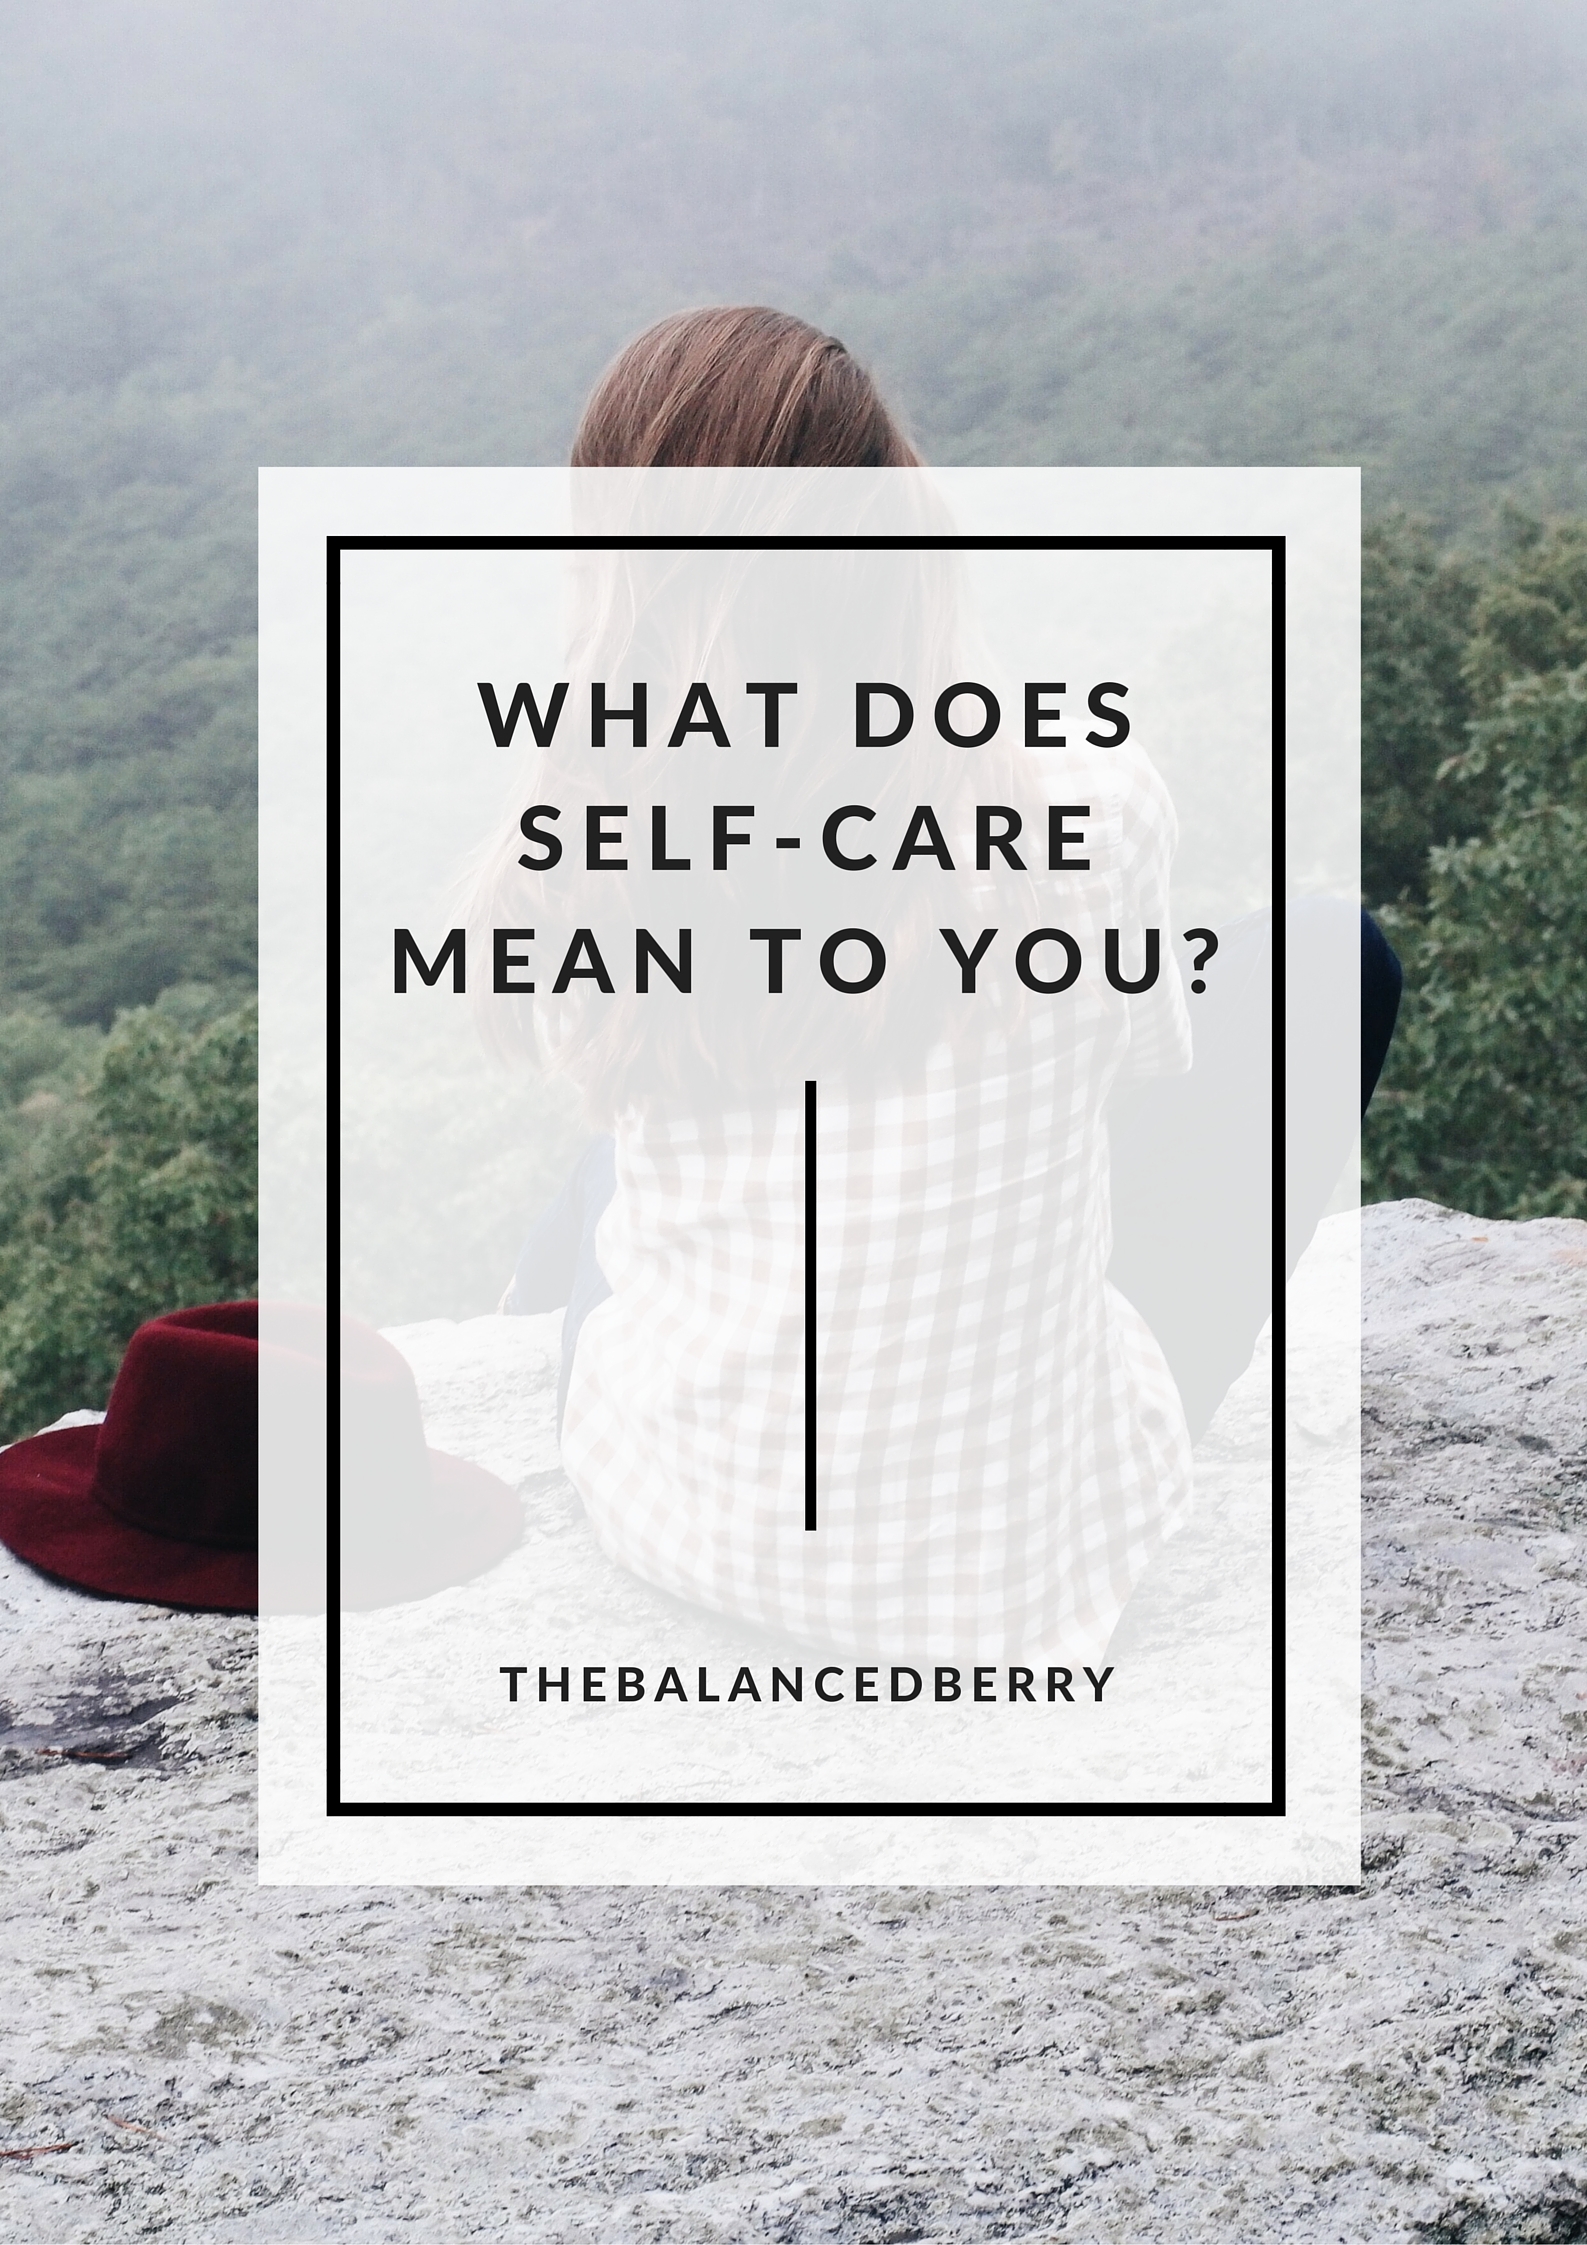 What does self-care mean to you? From the self-care series at thebalancedberry.com